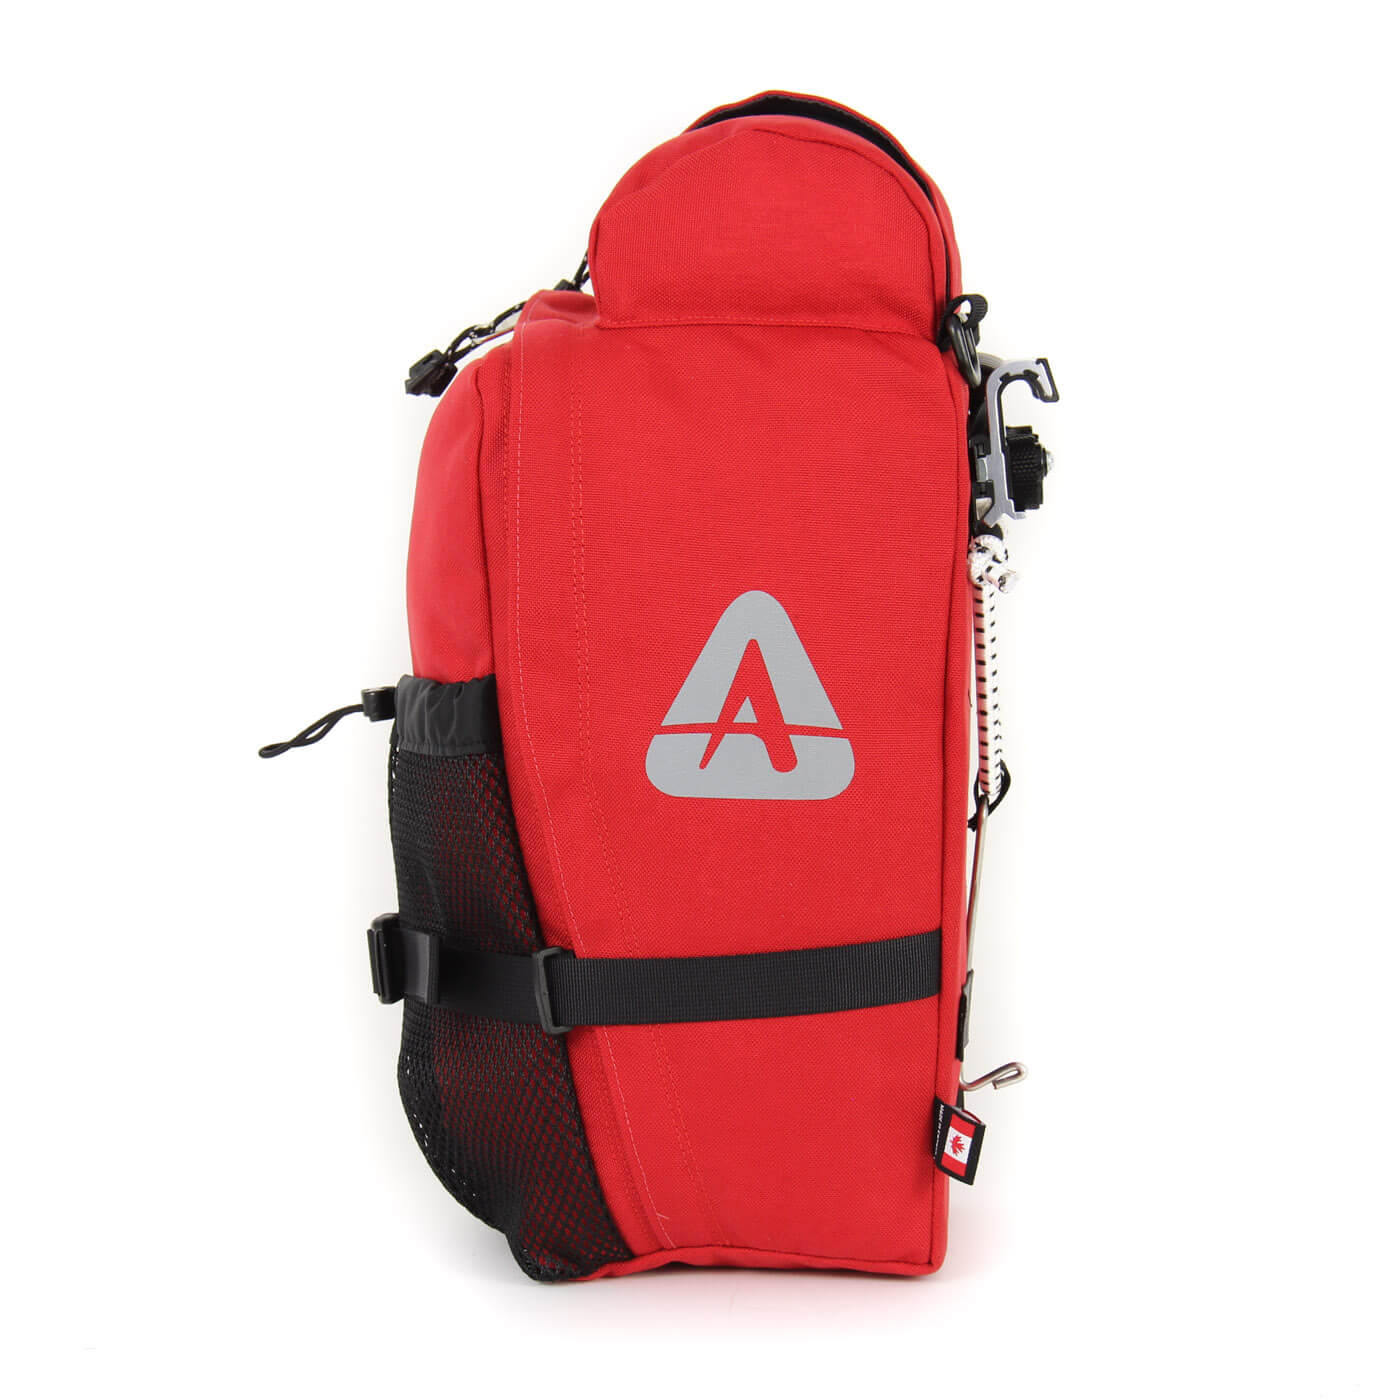 Arkel Bike Bags T-28 Classic - Touring Panniers